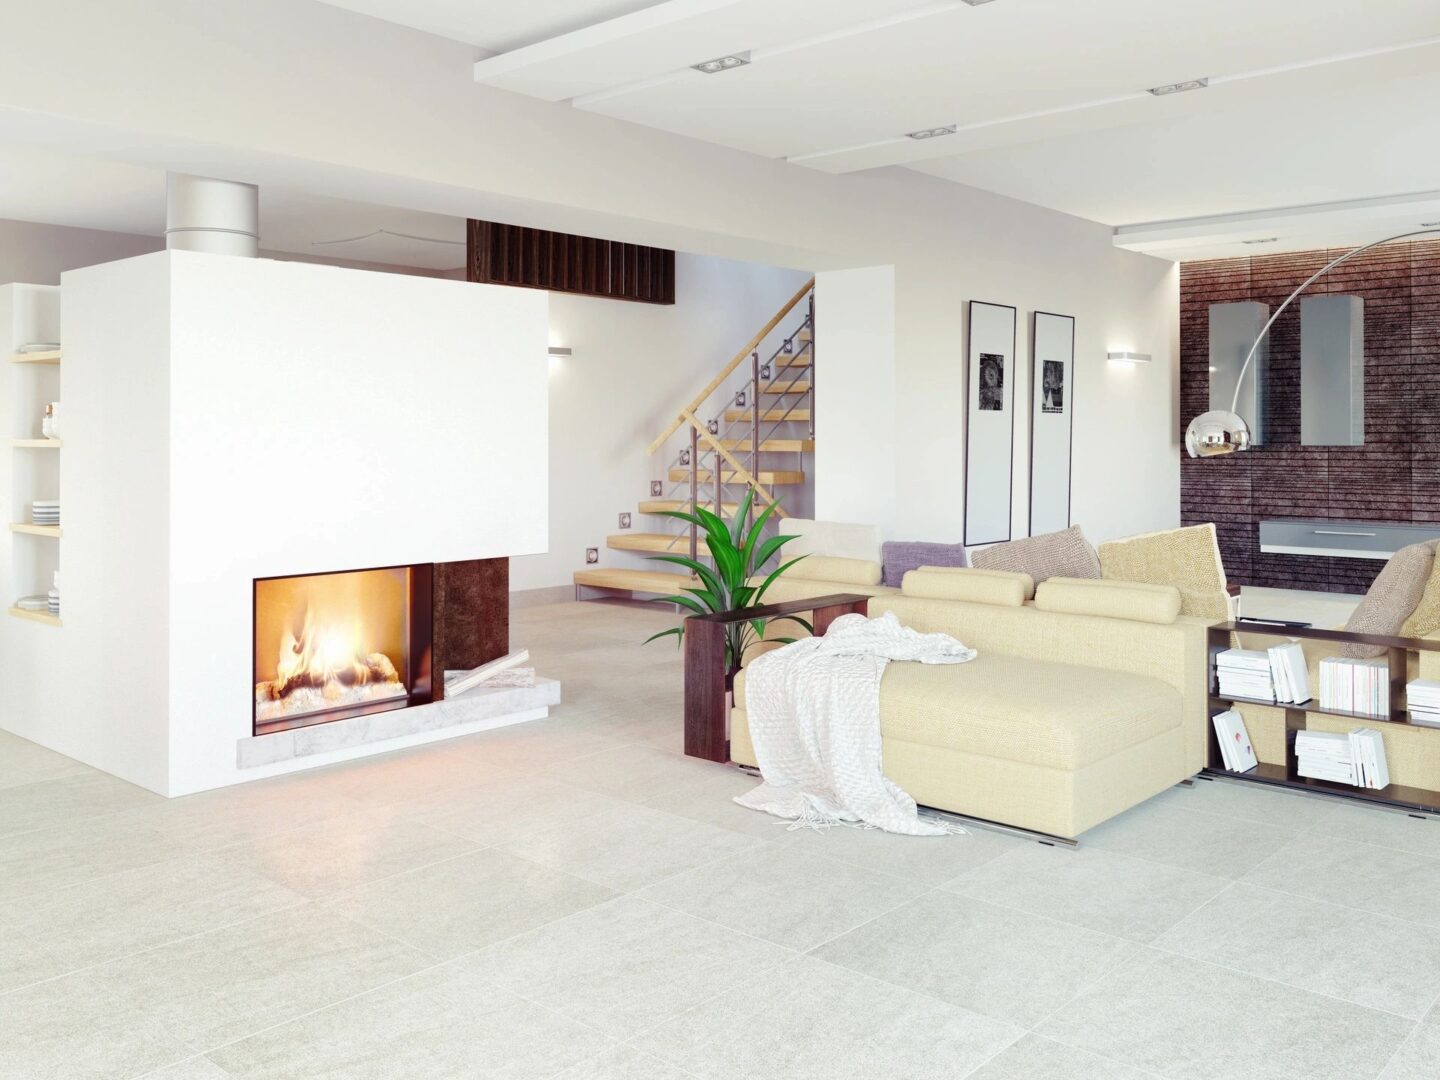 A living room with white tile floors and fireplace.